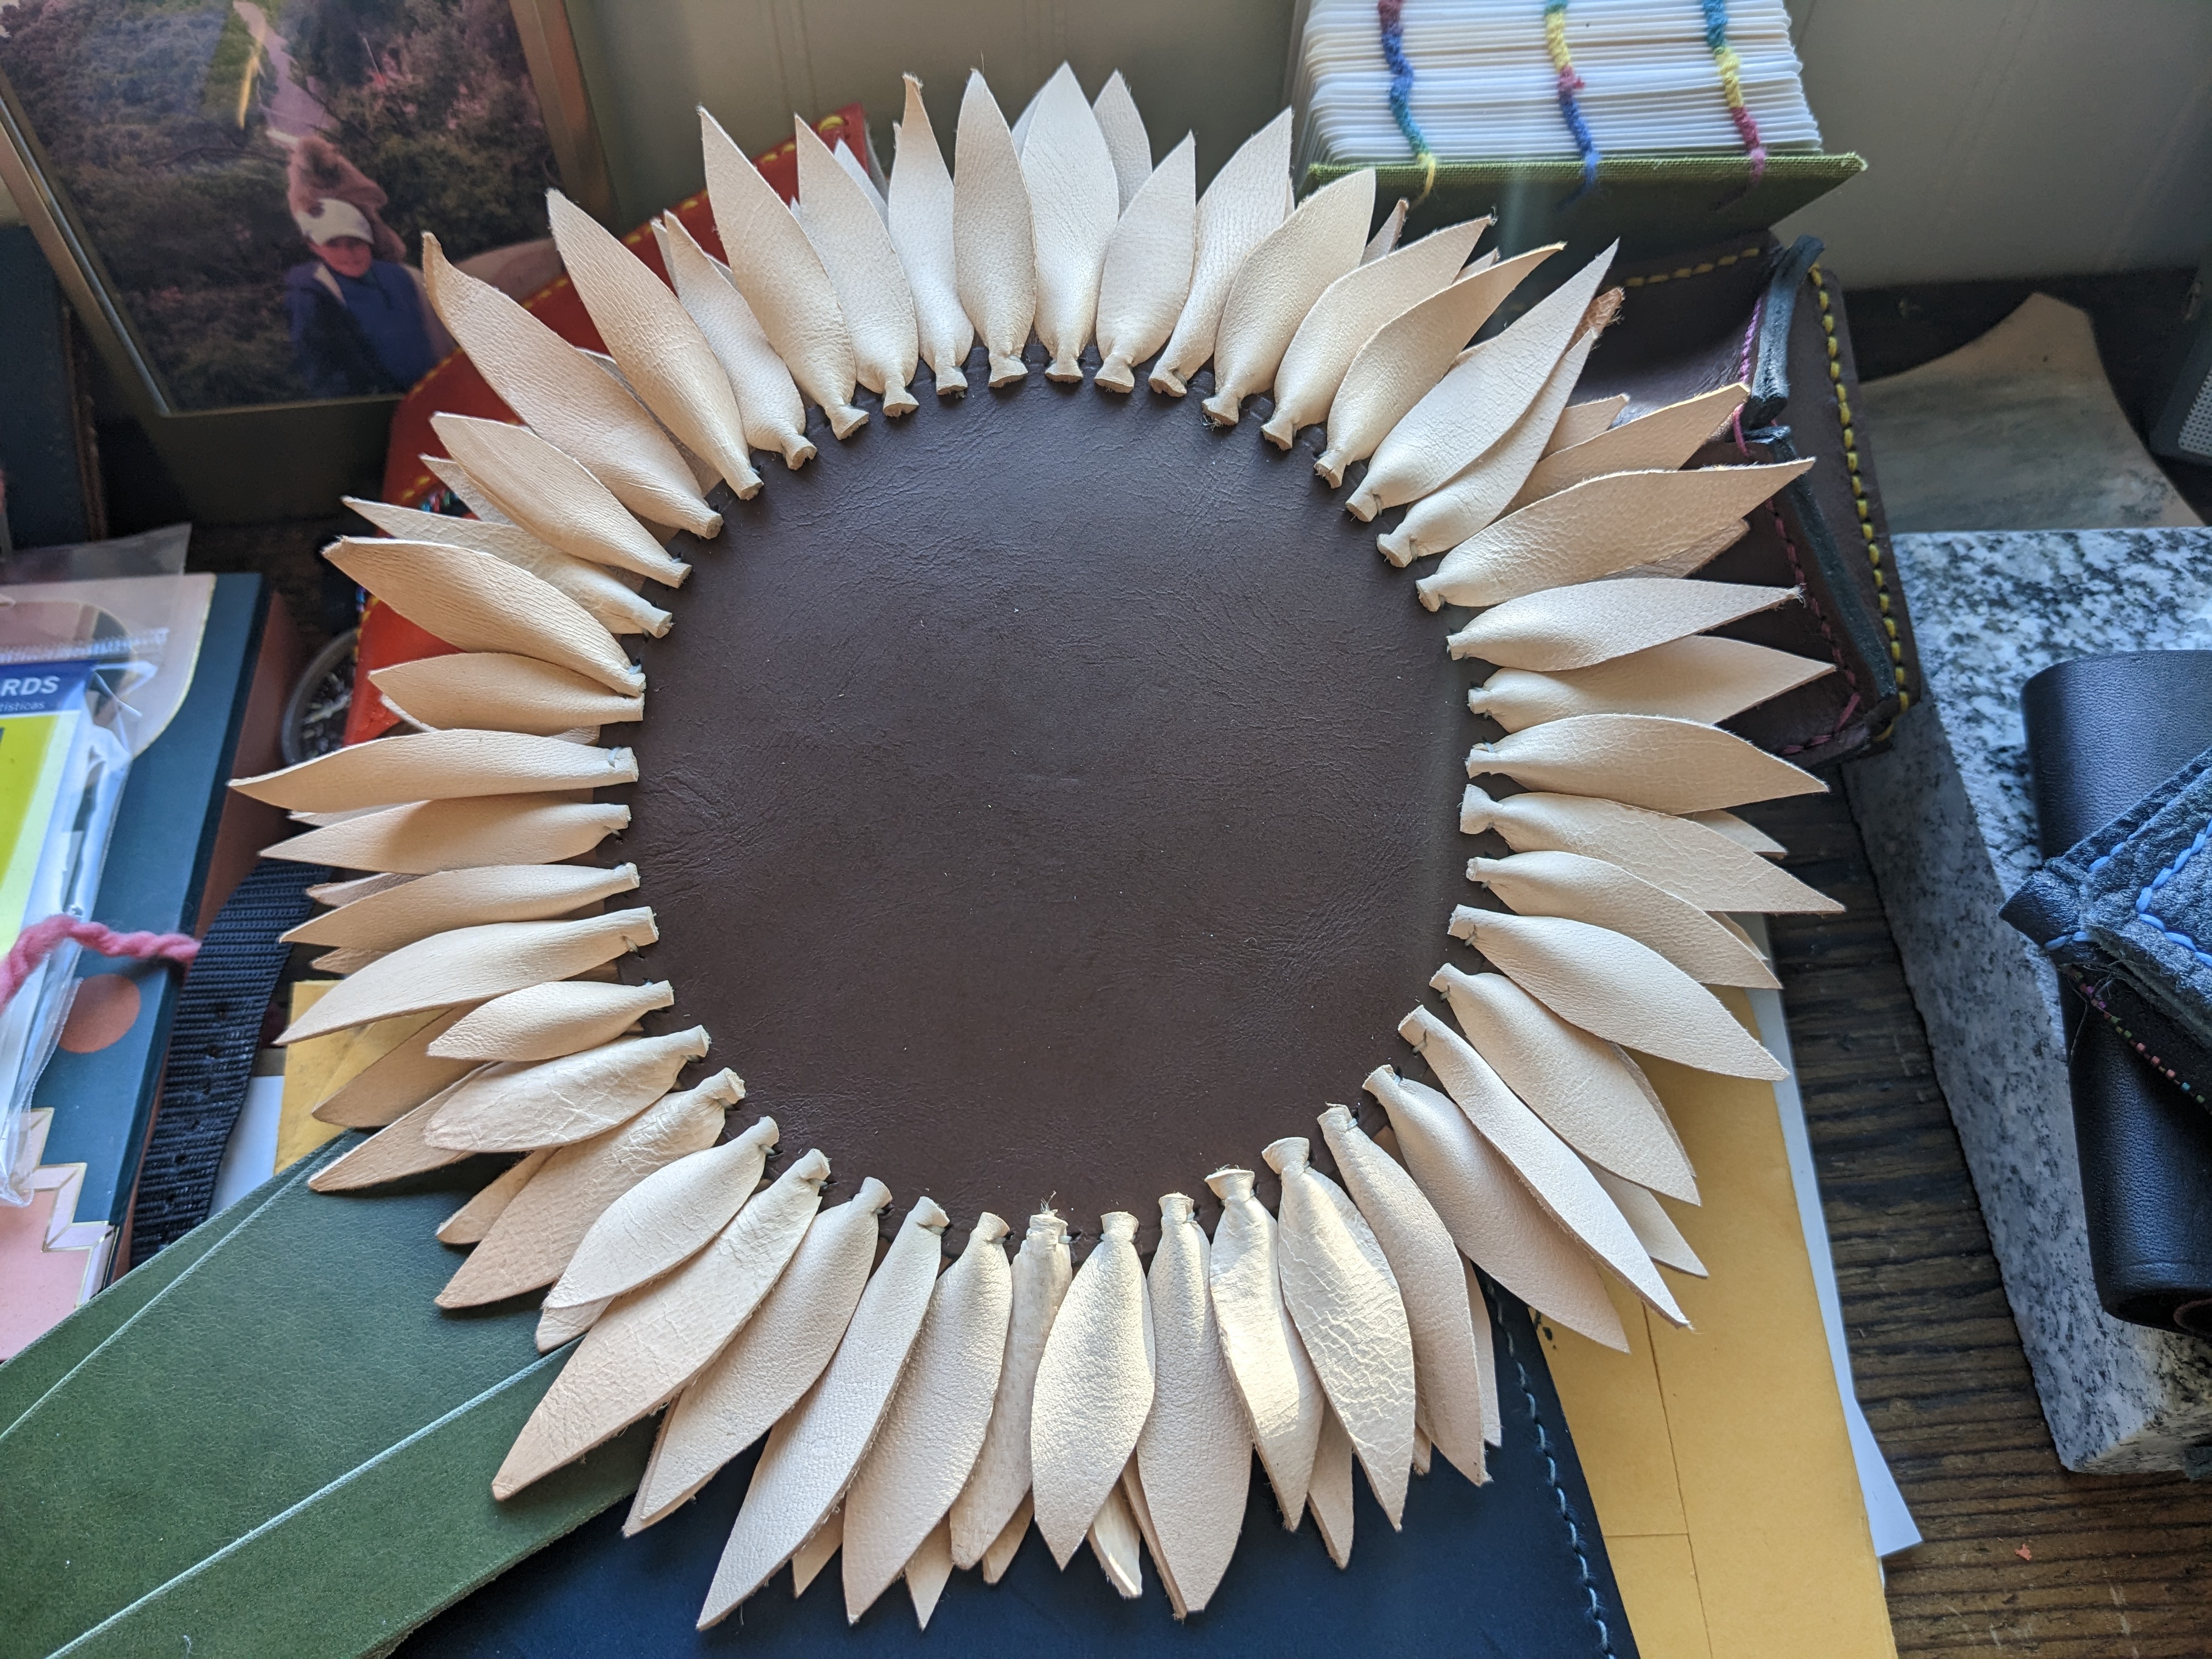 A sunflower made of leather. Many individual natural toned leather petals are sewn onto a brown center .